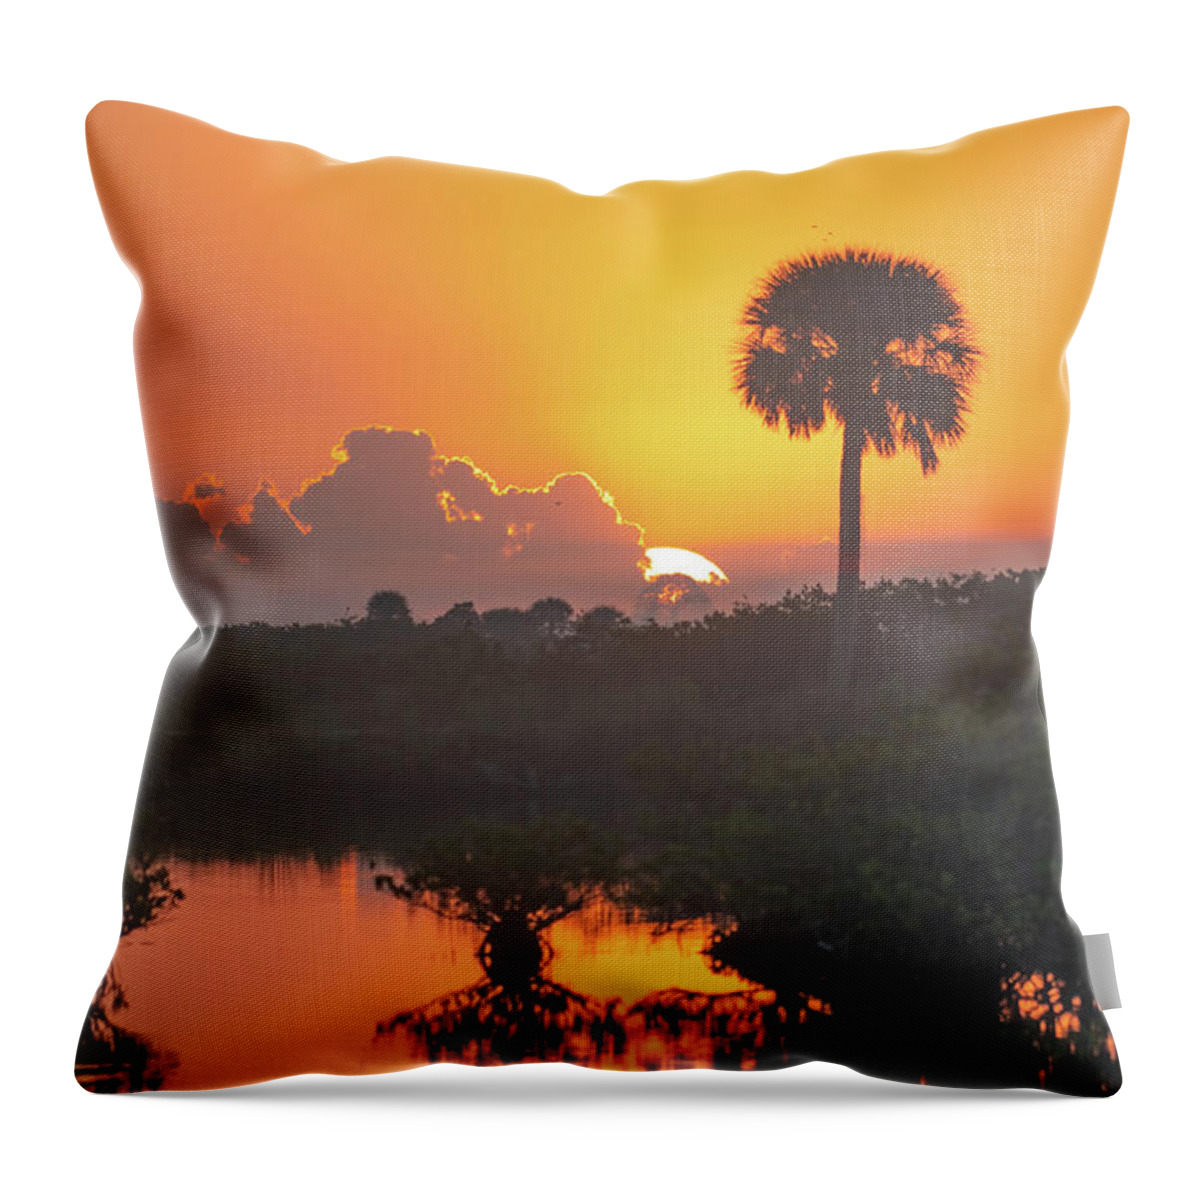 Sunrise Throw Pillow featuring the photograph Tequila Sunrise by Bradford Martin